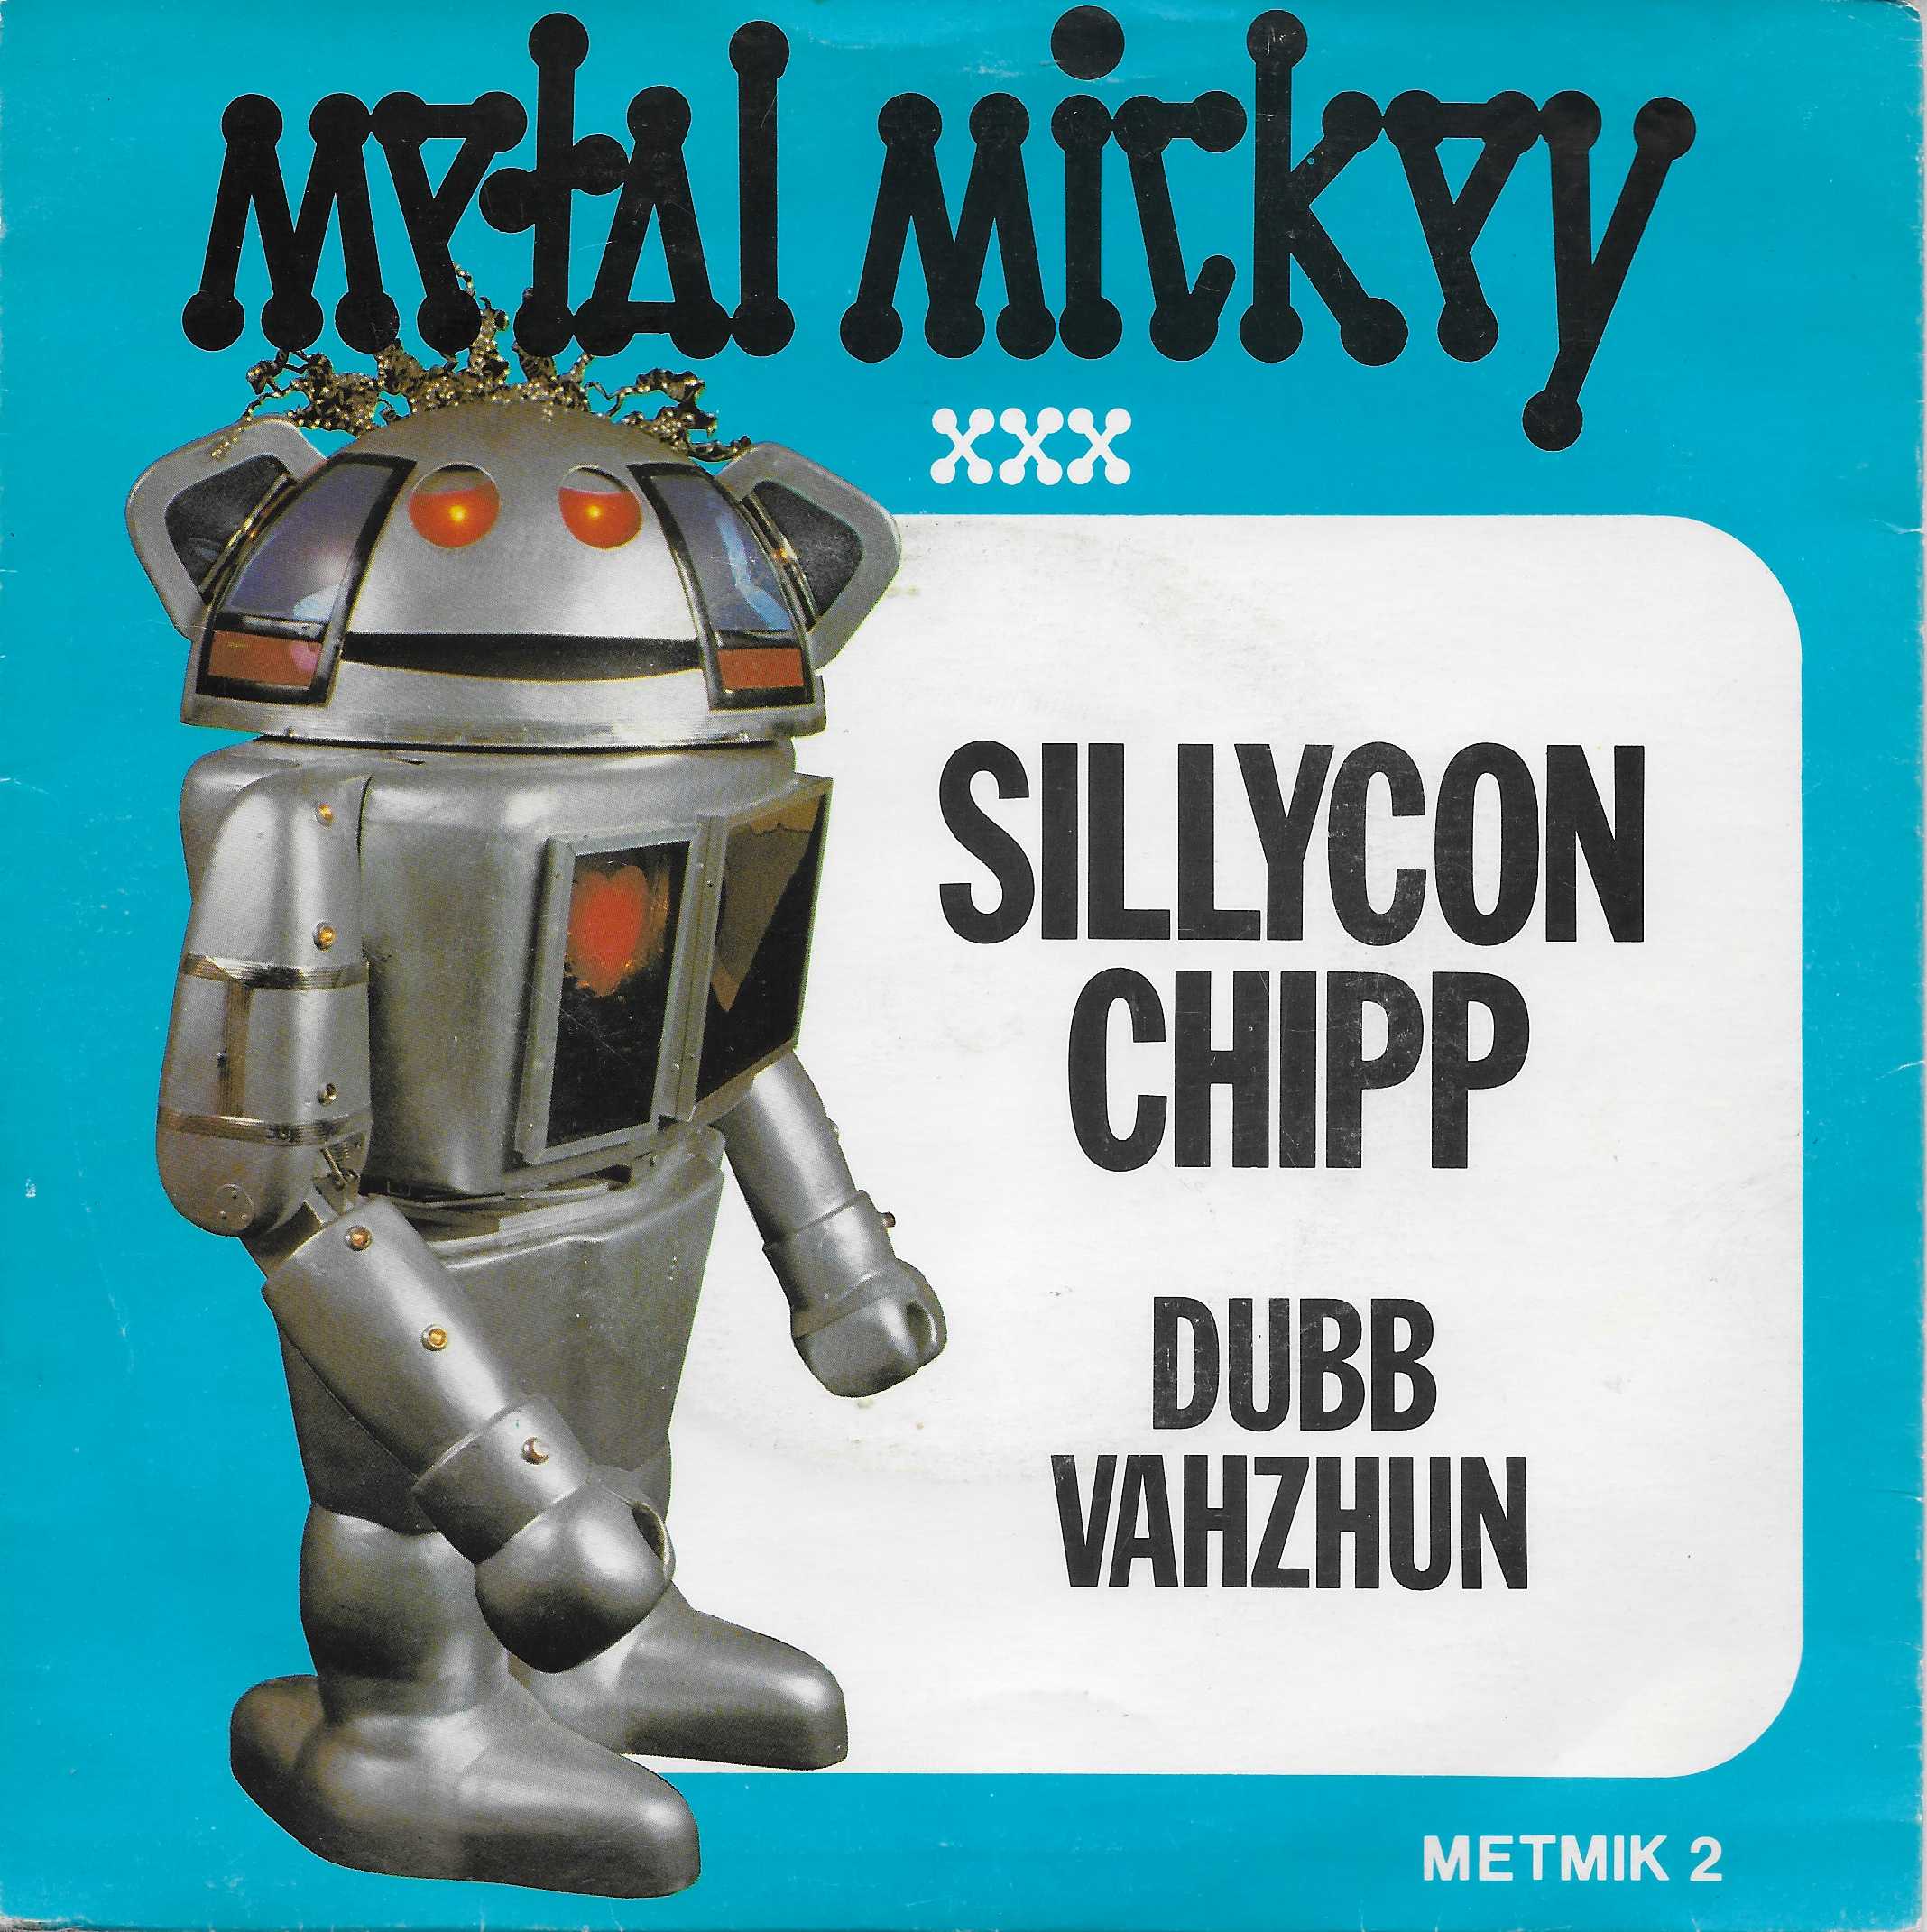 Picture of METMIK 2 Sillycon chipp by artist Metal Mickey from ITV, Channel 4 and Channel 5 singles library